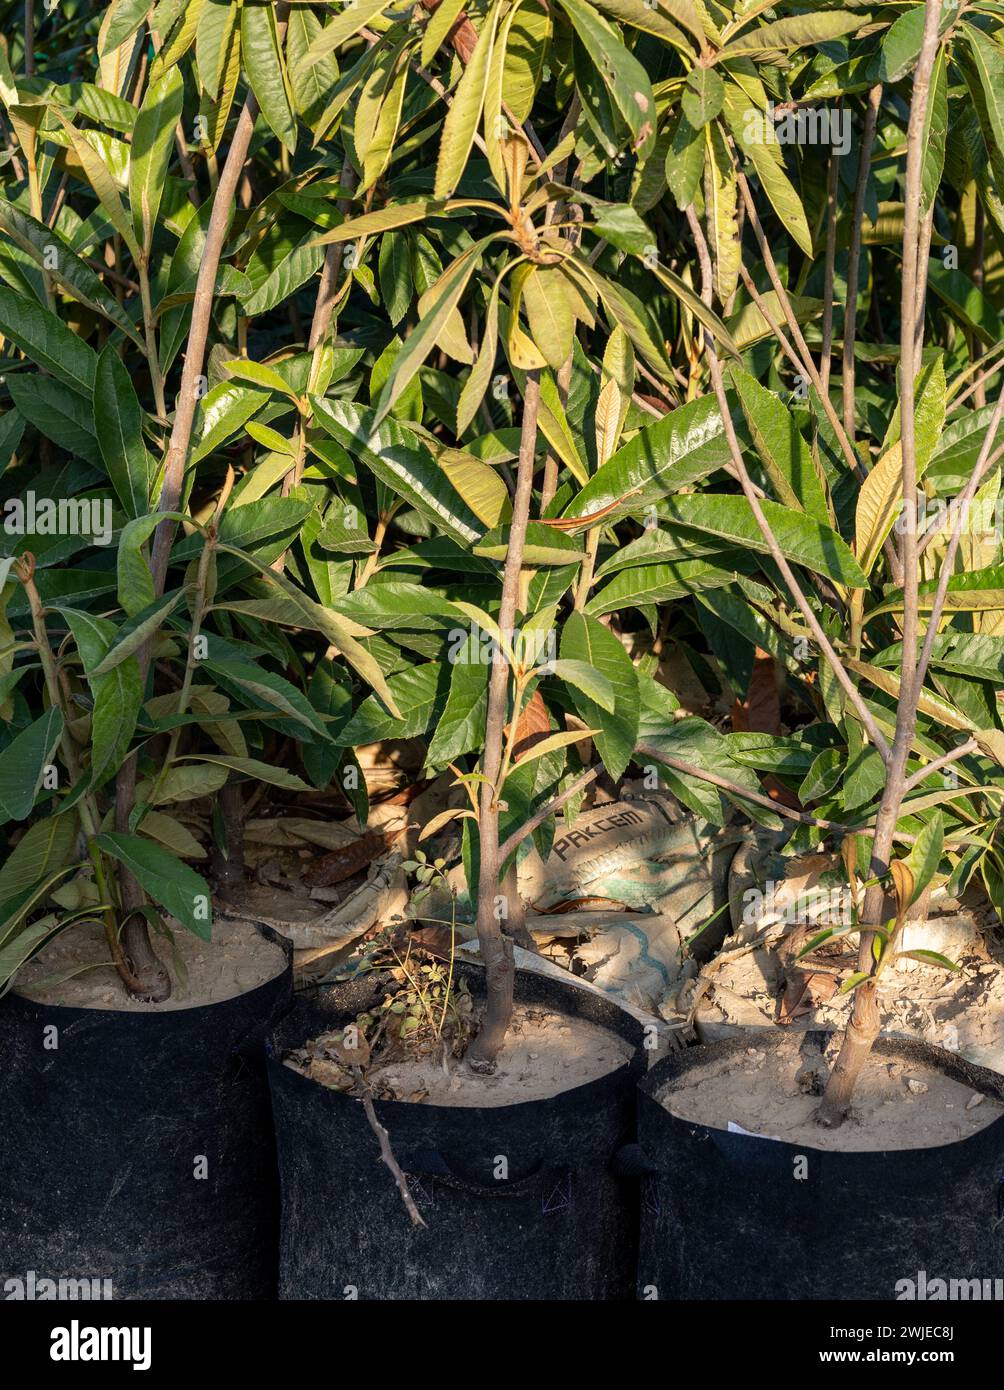 Loquat fruit small plants in grow bags Stock Photo